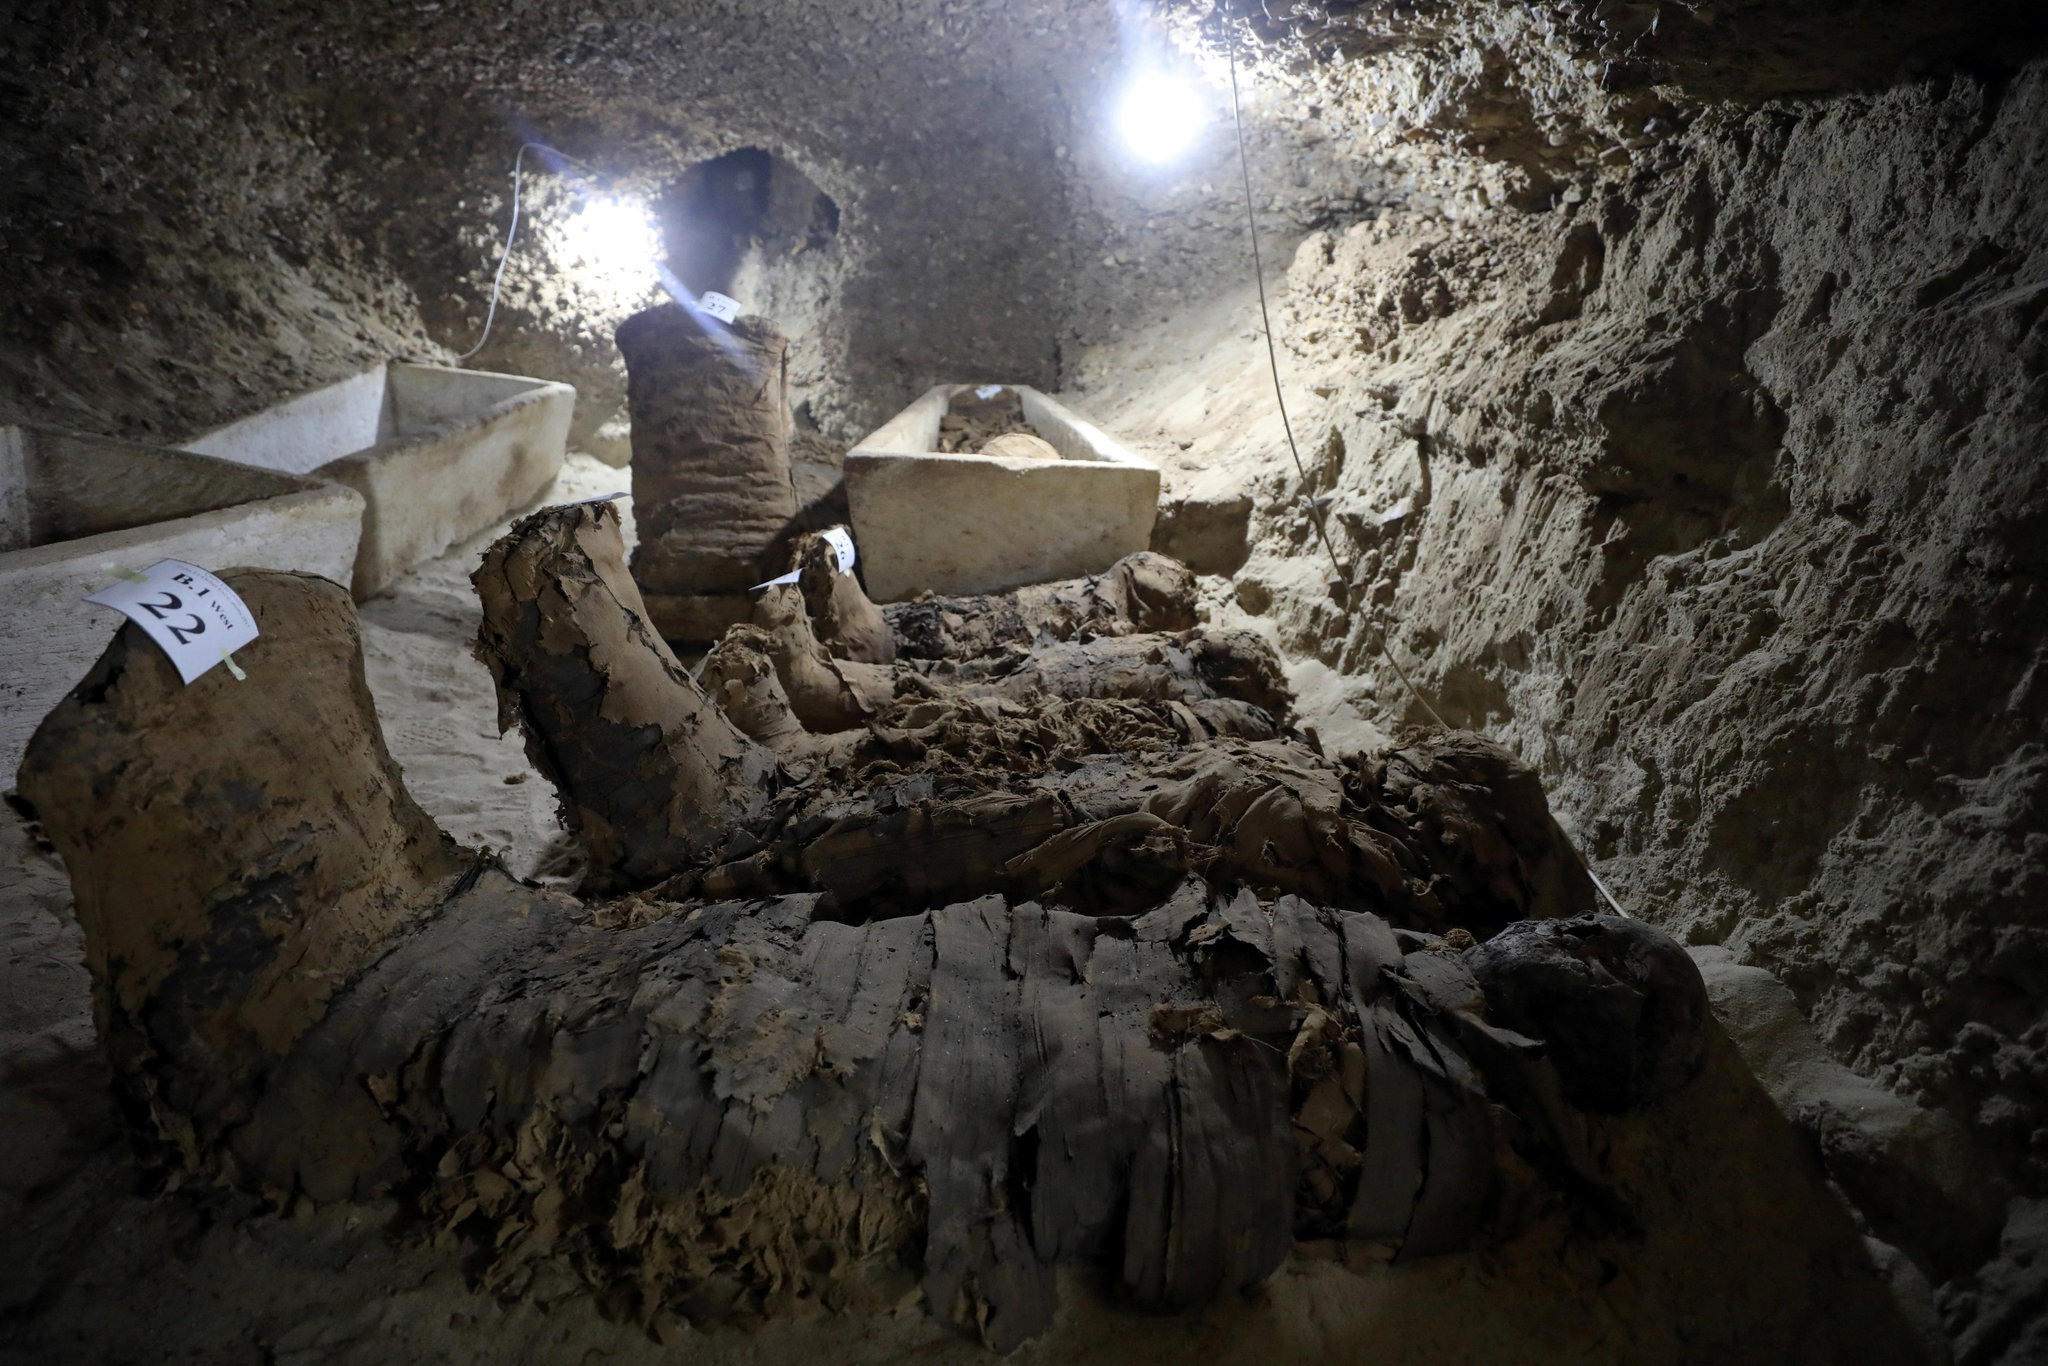 Ancient Burial Chamber Uncovered in Egypt, With 17 Mummies ... So Far - The New York Times